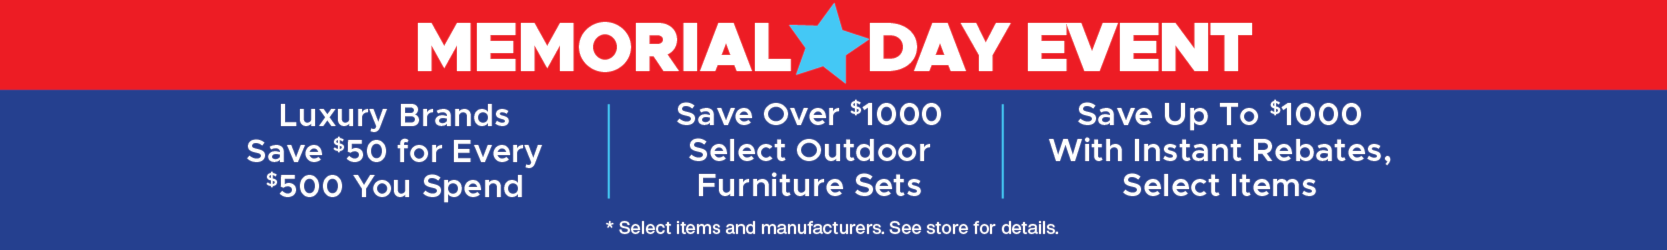 Memorial Day Event, Save up to $1000 with Instant Rebates